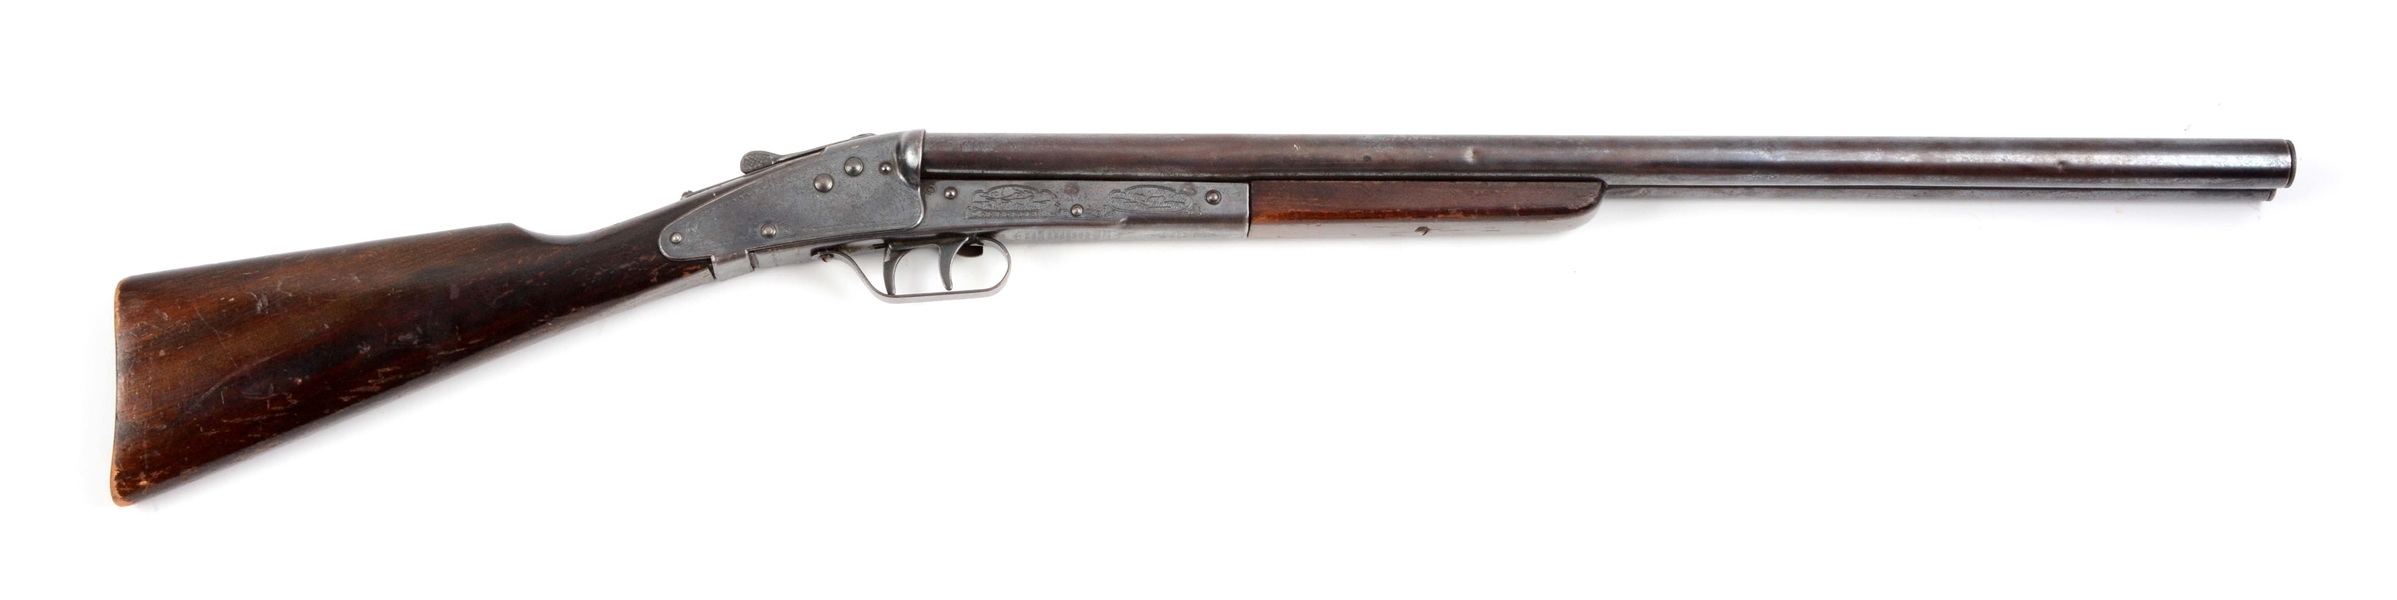 DAISY MODEL 104 SIDE BY SIDE AIR RIFLE. 